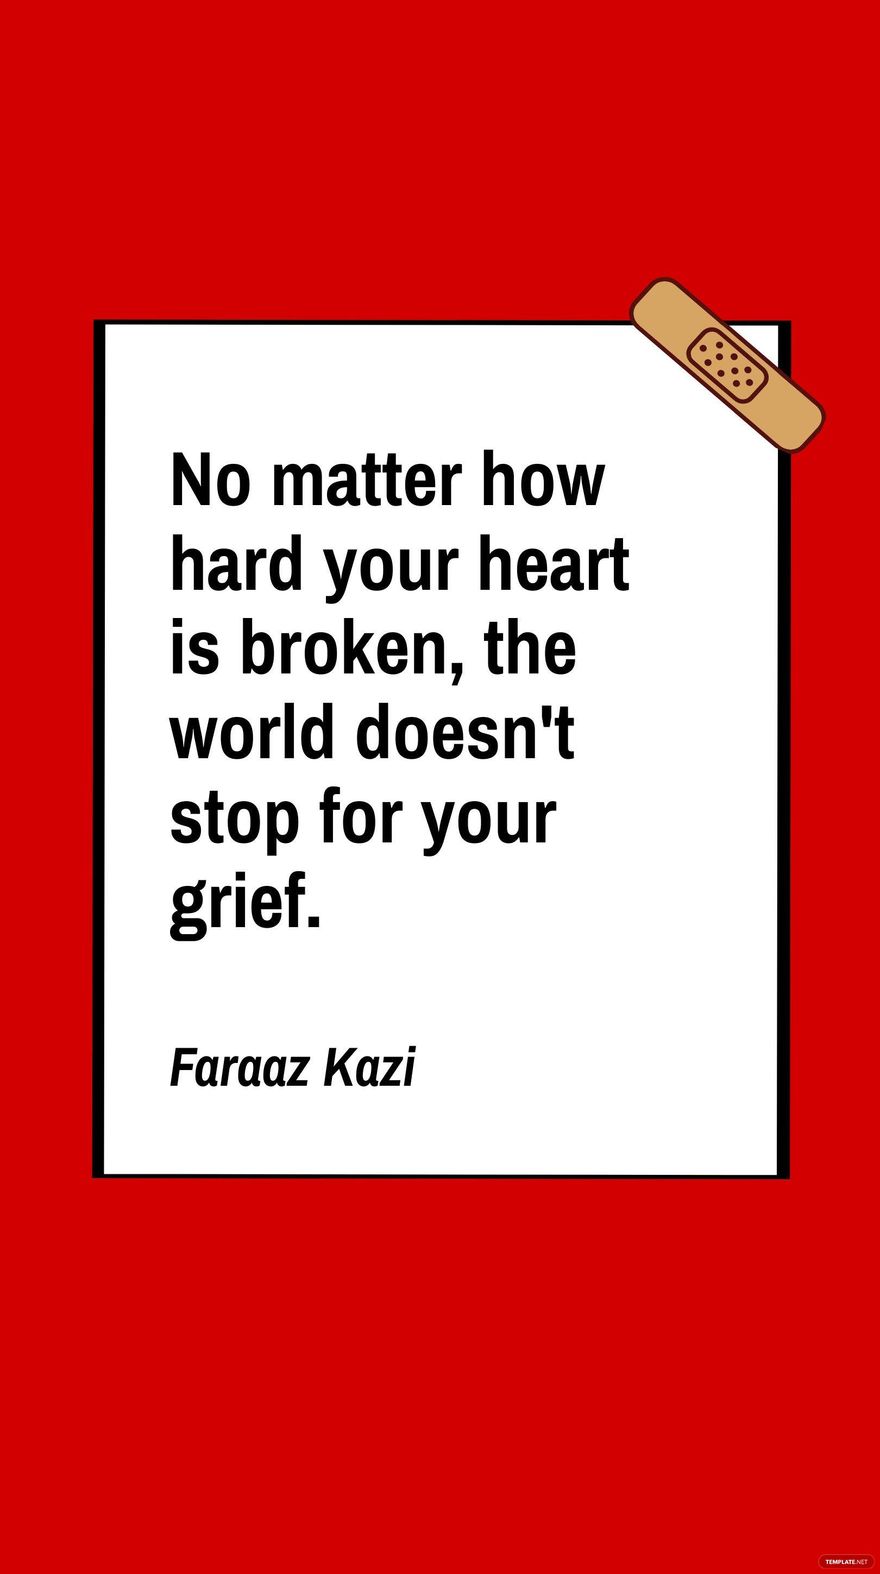 Free Faraaz Kazi - No matter how hard your heart is broken, the world doesn't stop for your grief.